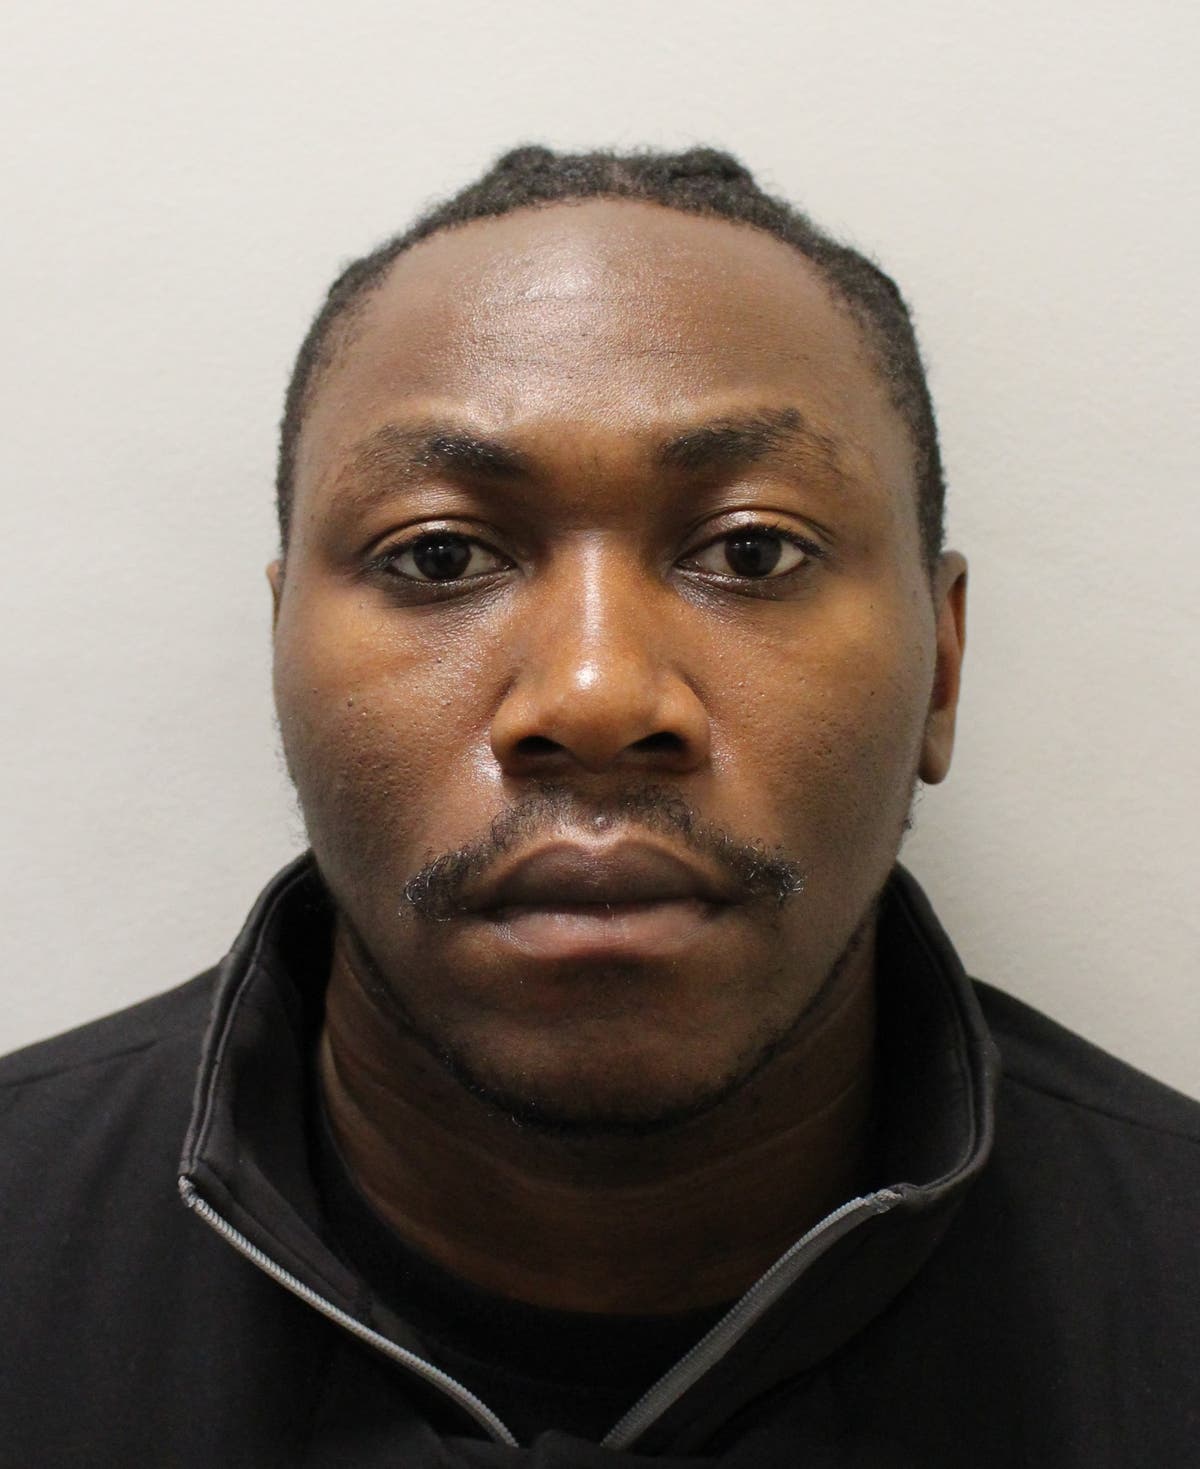 South London school worker who abused position to groom teenager jailed